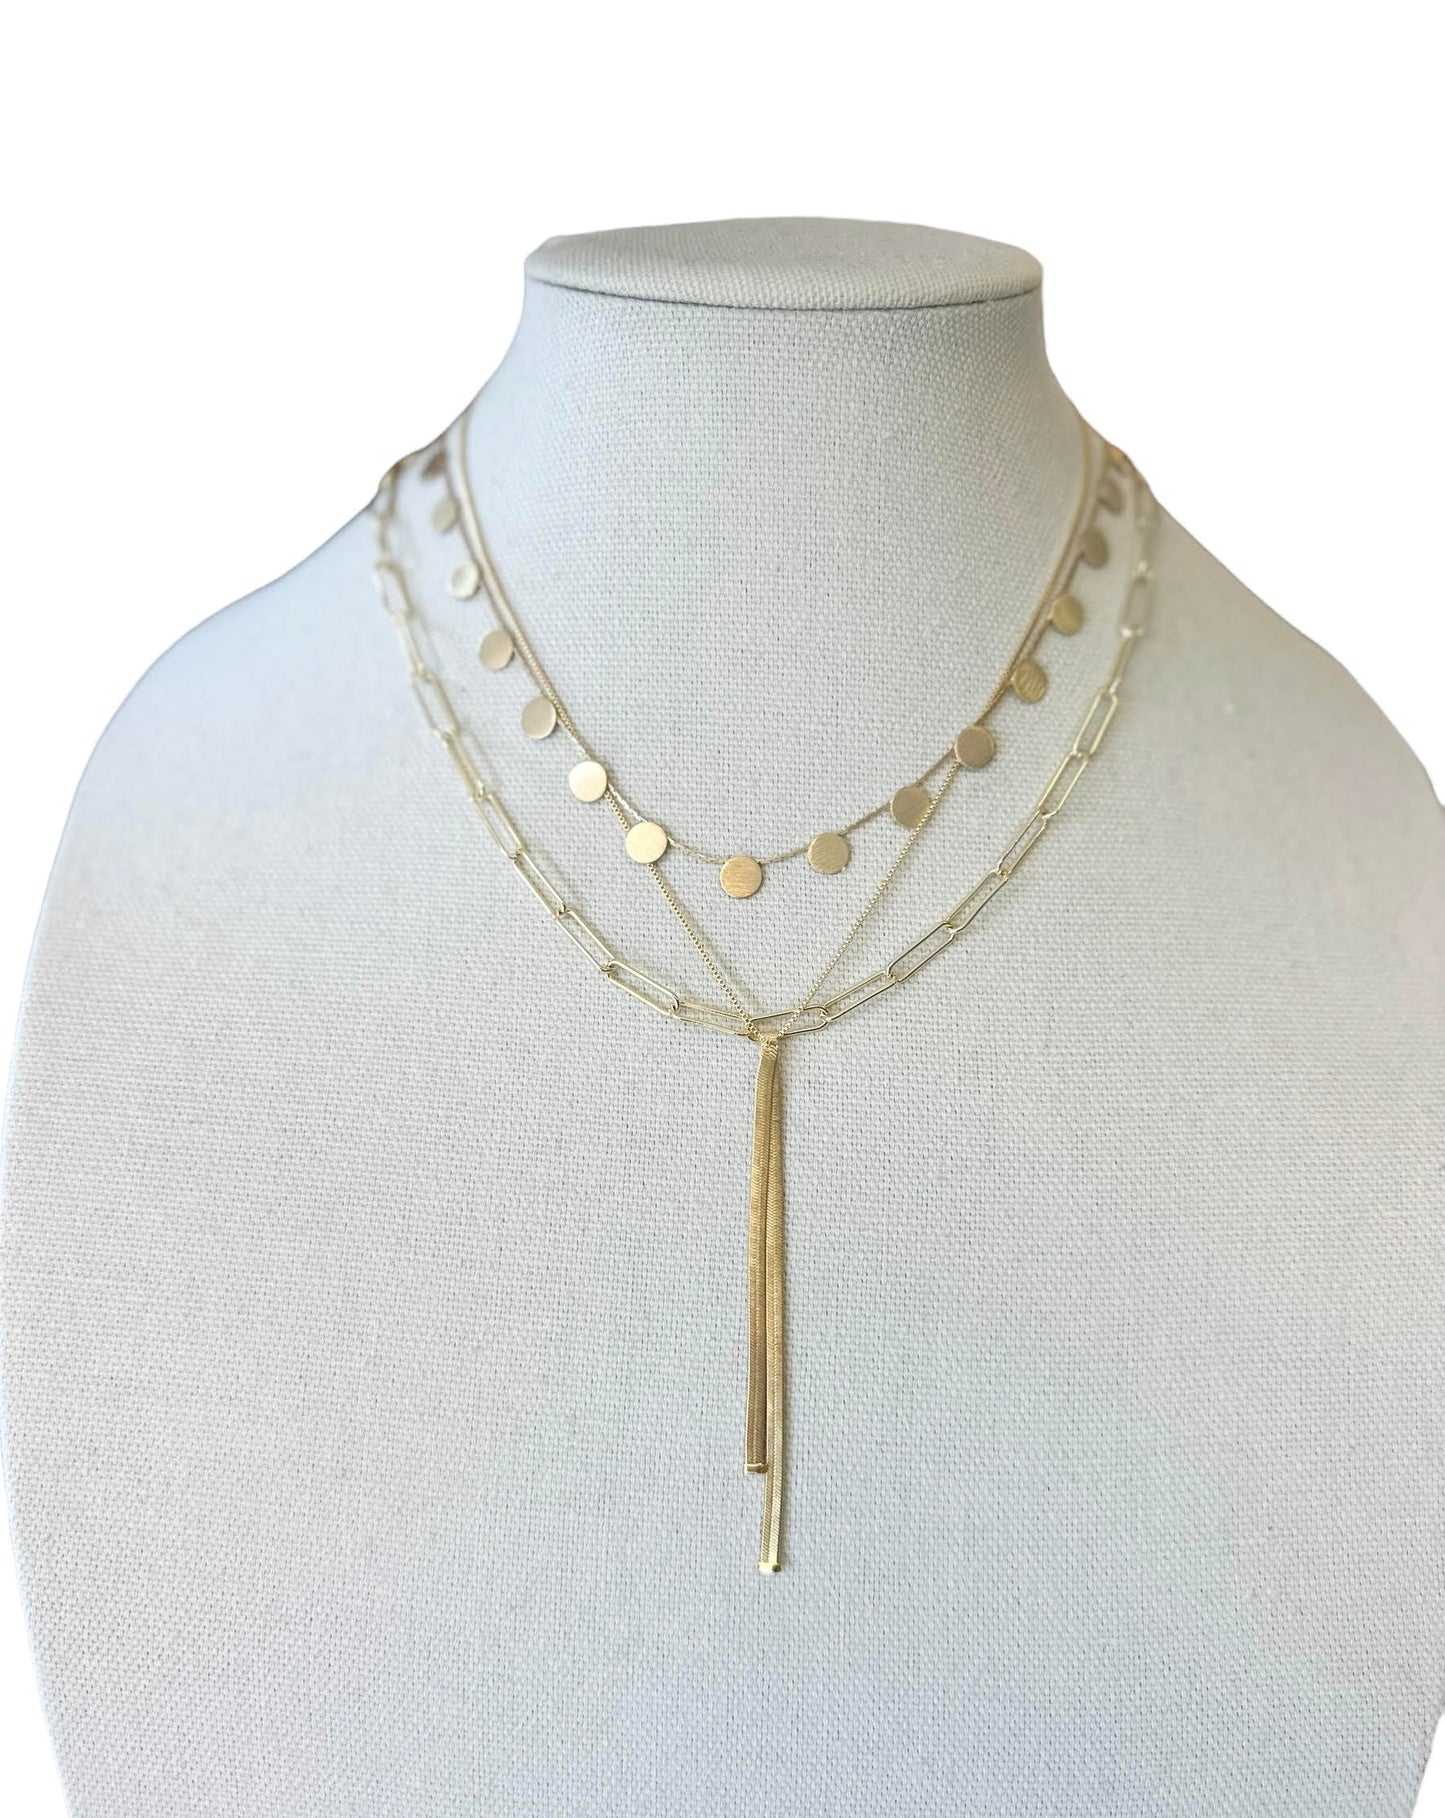 Eden Necklace in gold by Farrah B